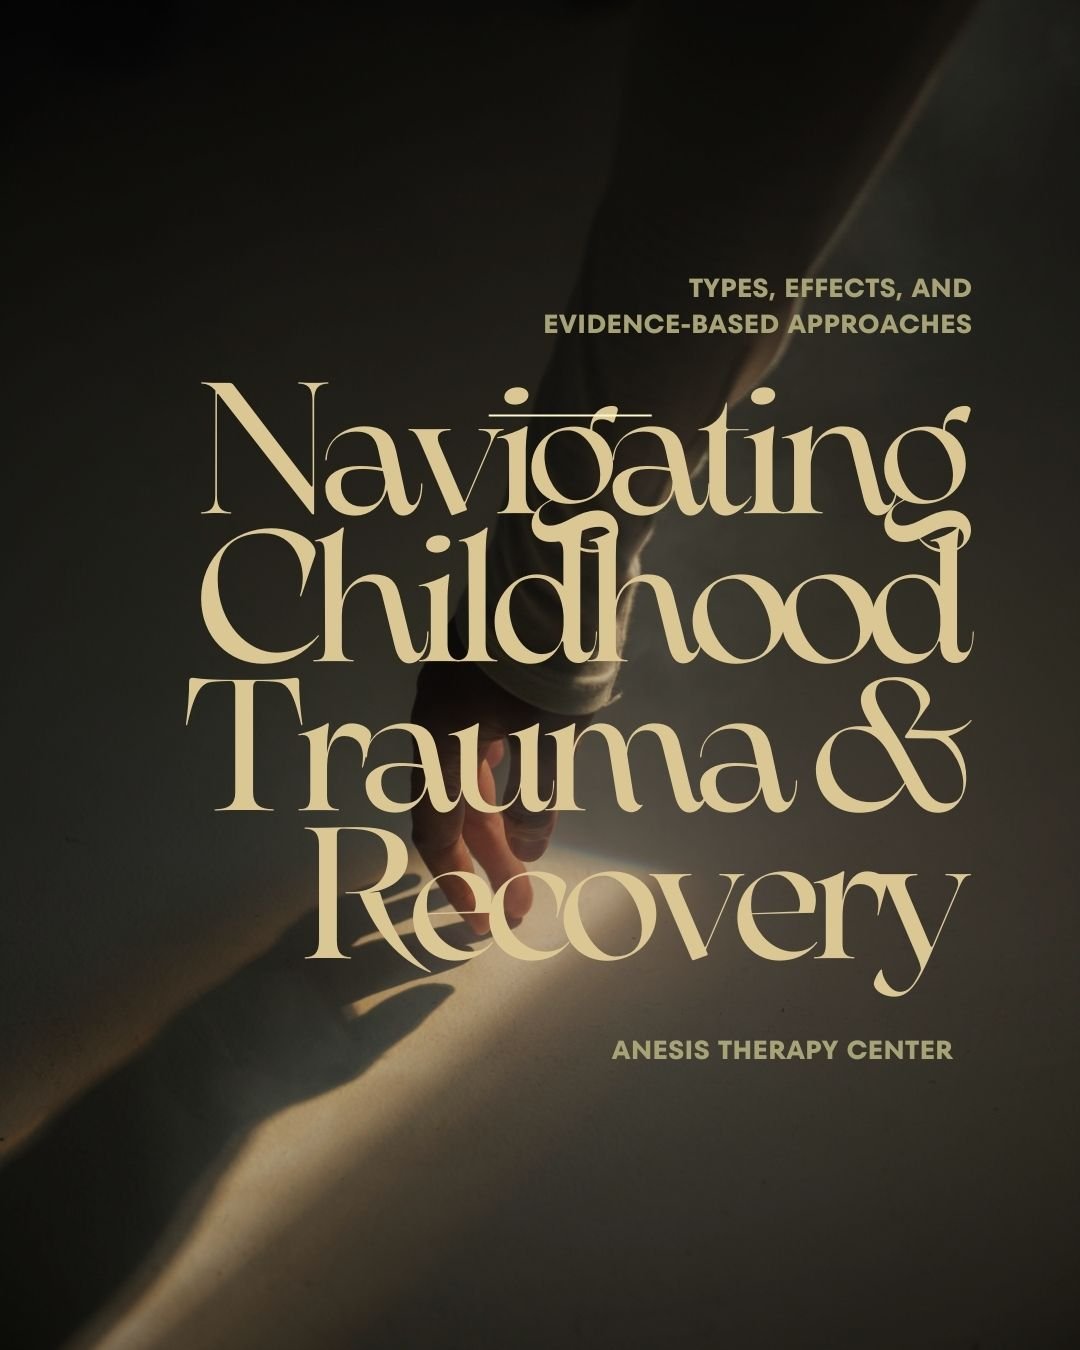 Navigating Childhood Trauma and Recovery: Types, Effects, and Evidence-Based Approaches